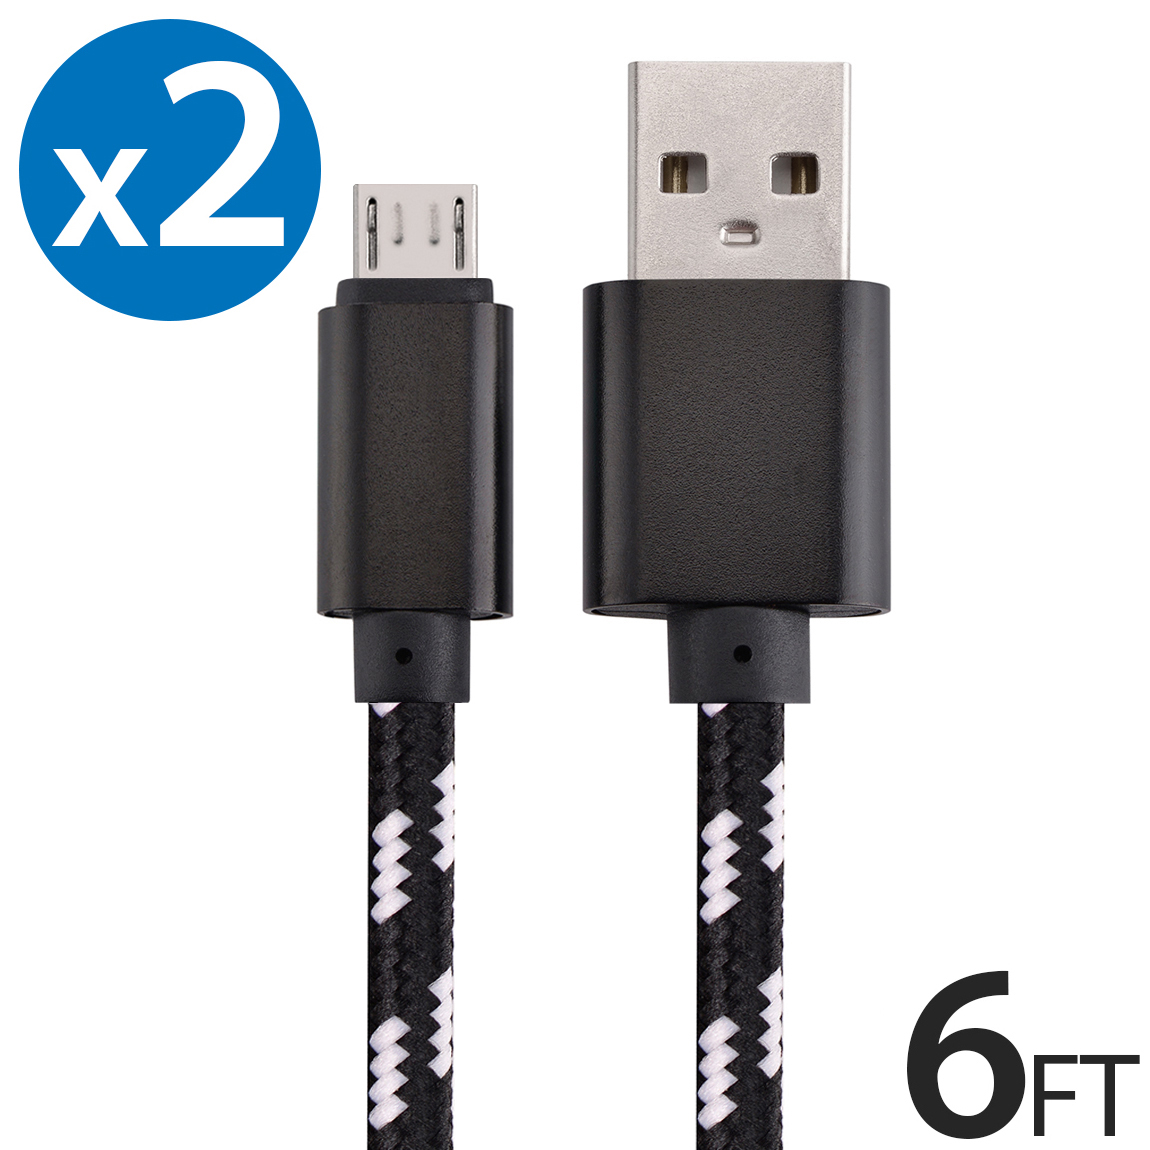 2x Micro USB Cable Charger For Android, FREEDOMTECH 6ft USB to Micro USB Cable Charger Cord High Speed USB2.0 Sync and Charging Cable for Samsung Galaxy S6 S7, HTC, Moto, Nokia, MP3, Tablet and More - image 1 of 1